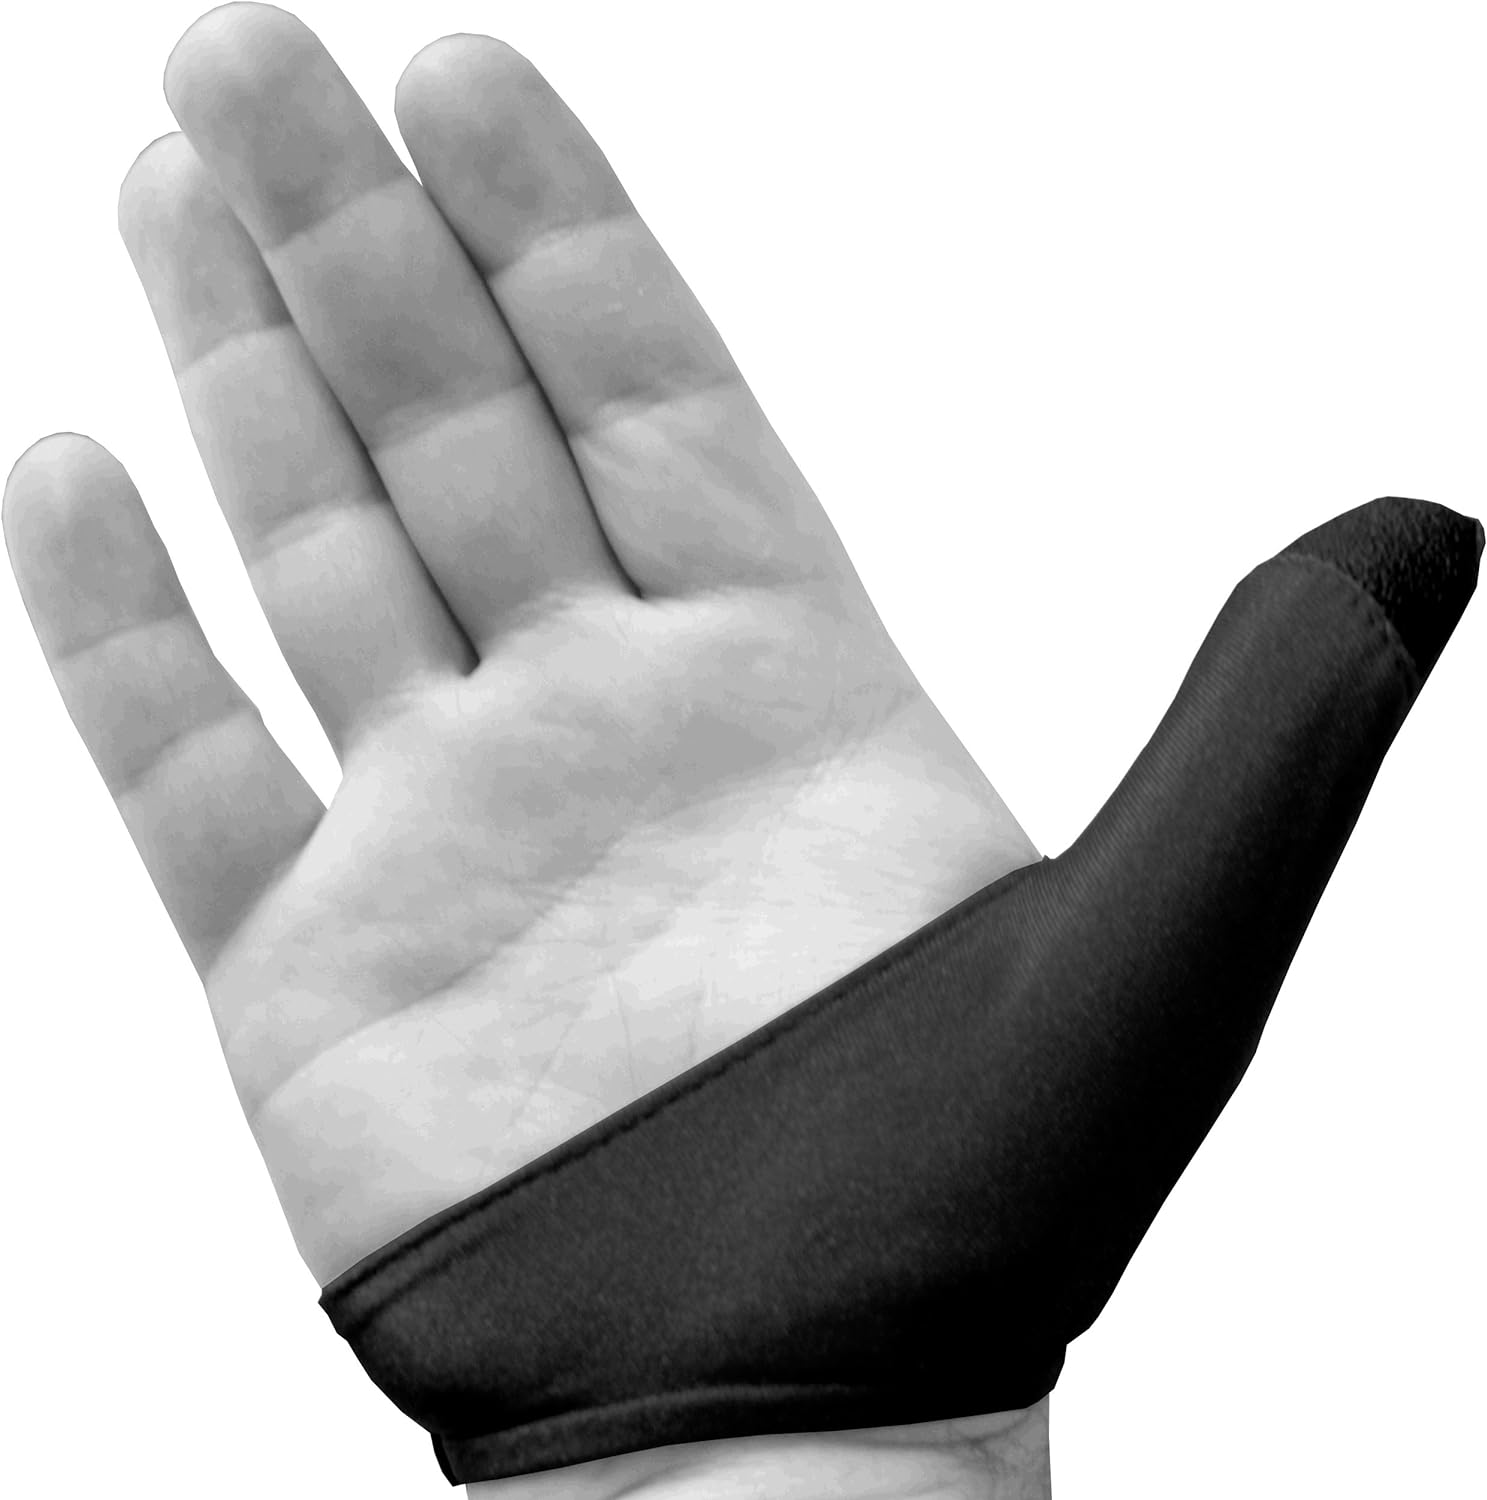 LoveNSports - Bowling Ball Thumb Socks Insert Around Wrist - Tape Replacement with Grip Support- Right Glove Saver